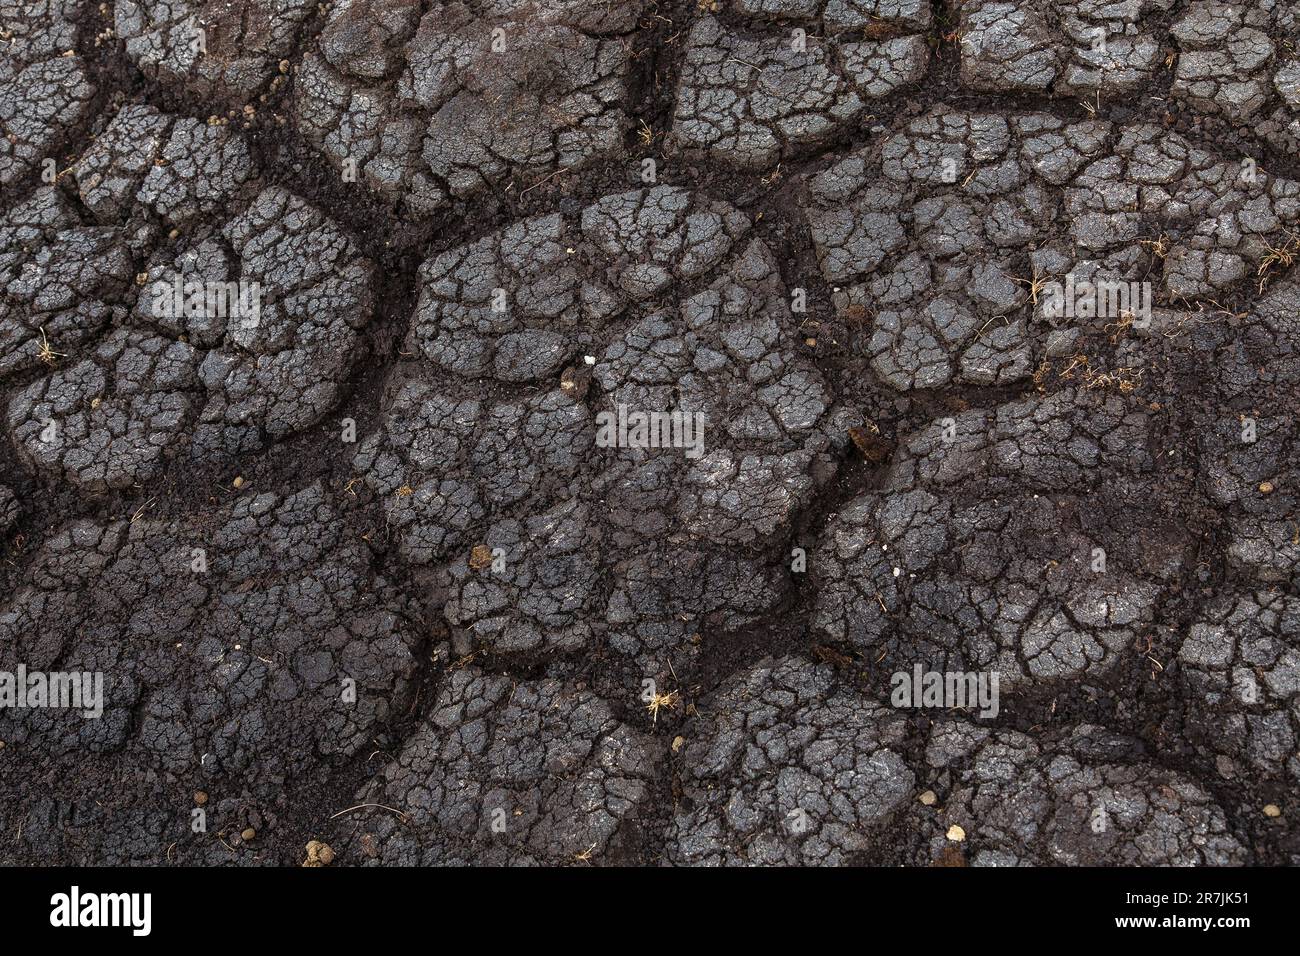 Dark Brown Texture of Polygonal Cracked Soil, Scalpay of Harris, Hebrides, Outer Hebrides, Western Isles, Scotland, United Kingdom, Great Britain Stock Photo